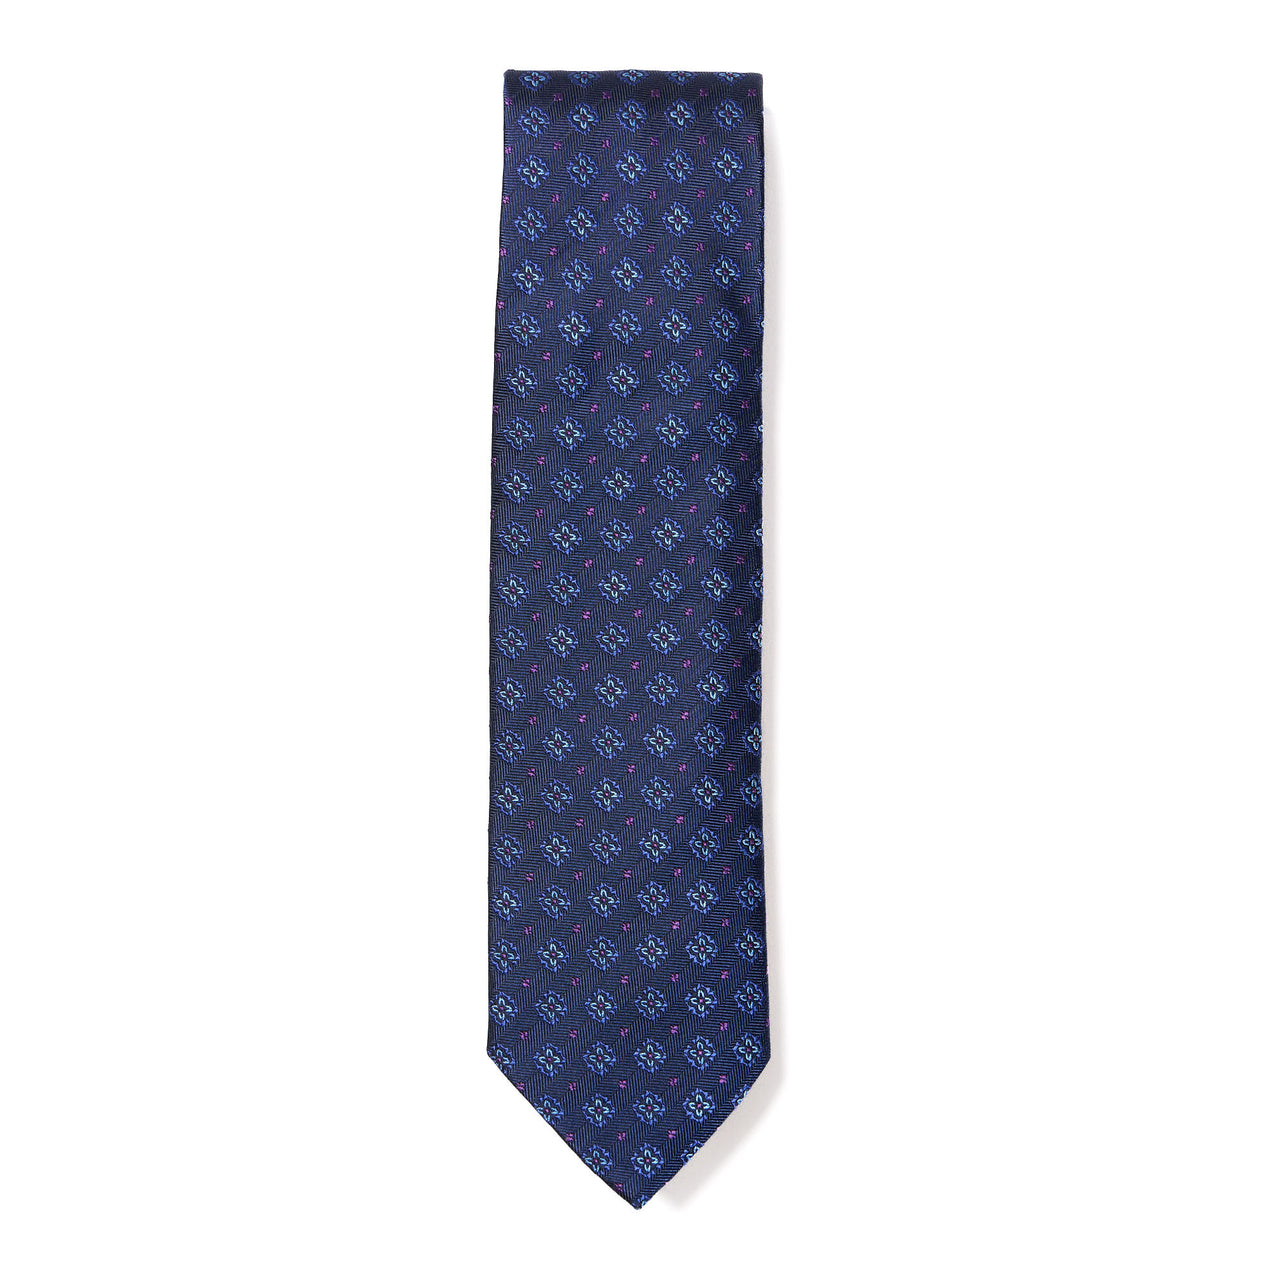 HENRY SARTORIAL X CANTINI Woven Silk Tie NAVY/BLUE